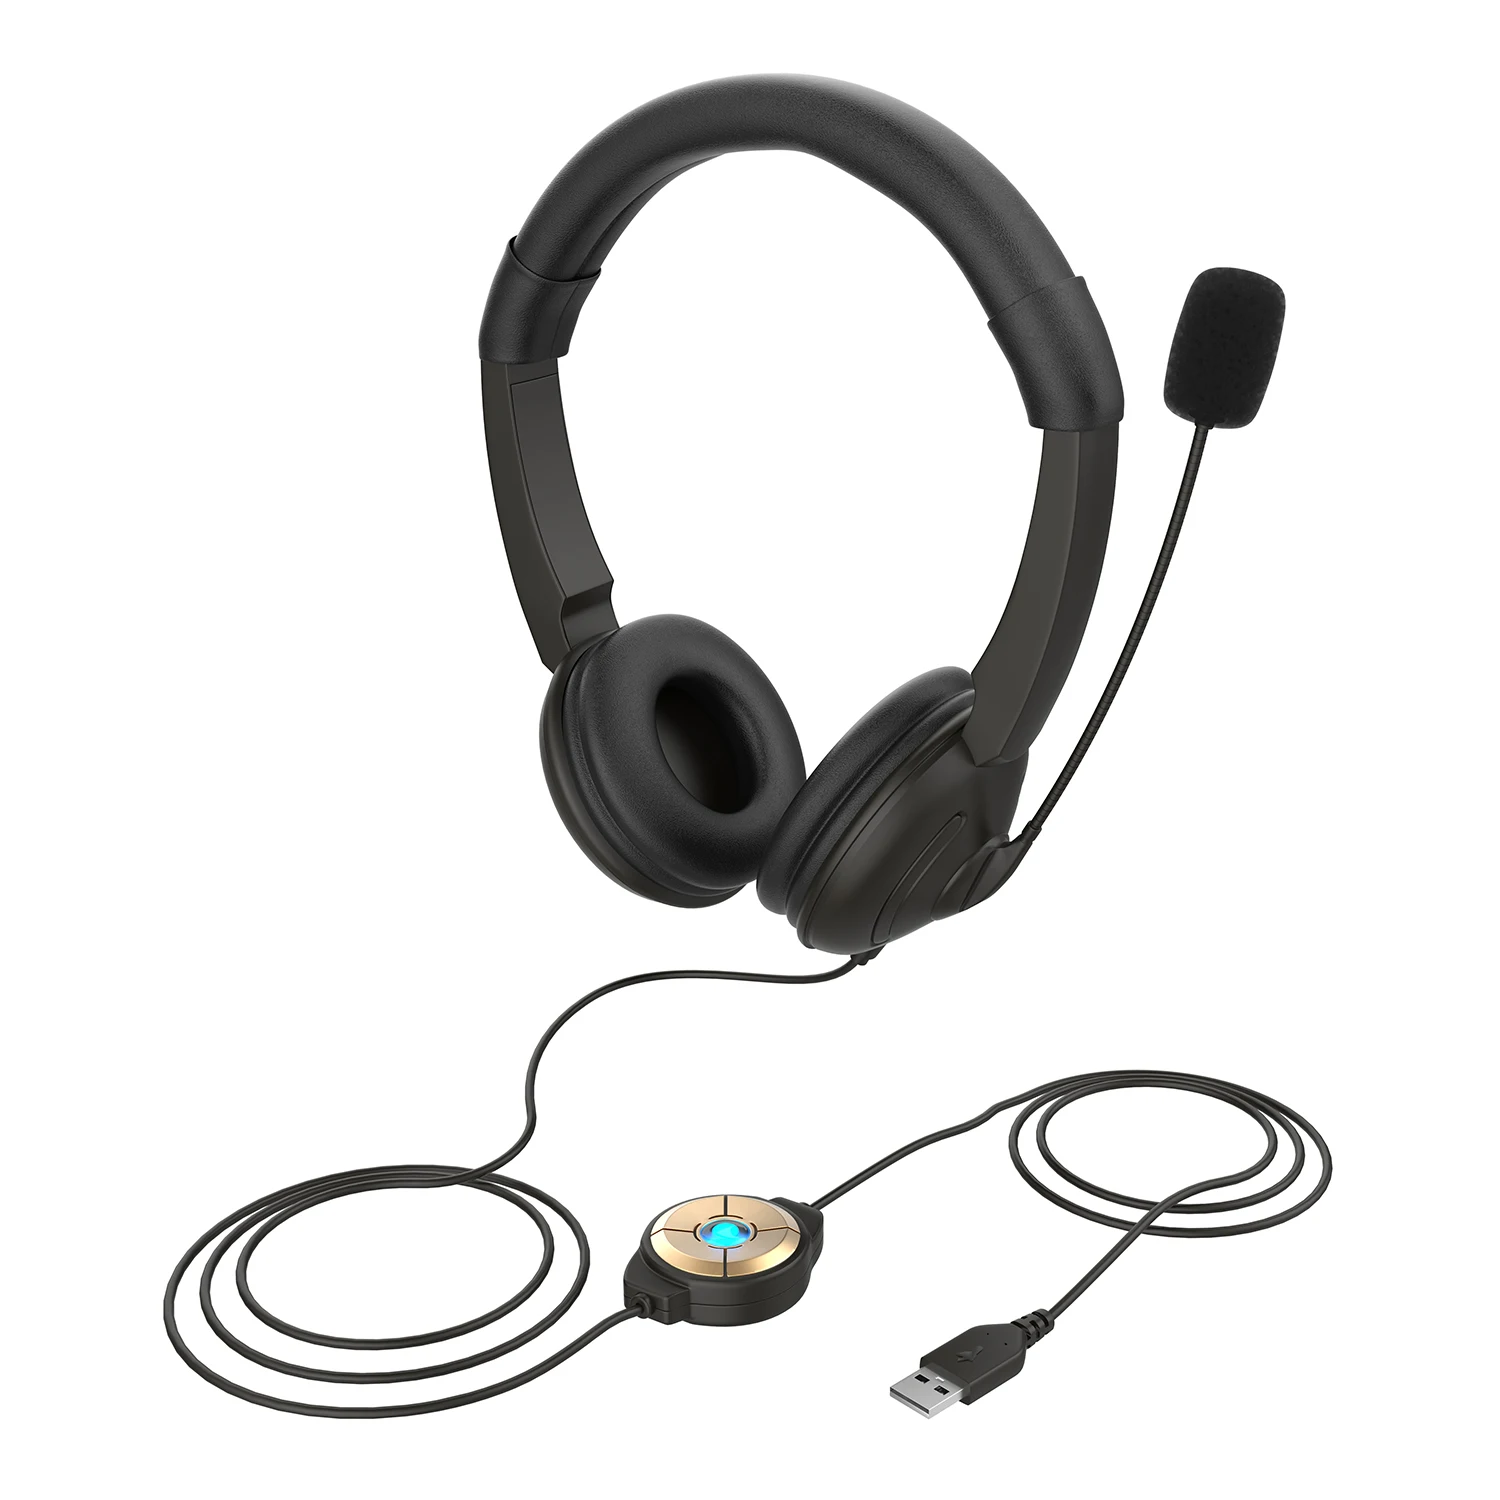 

USB Wired Headset Adjustable Headband On Ear Computer Headphone Noise Cancelling with Mic Call Center Earphone Volume Control